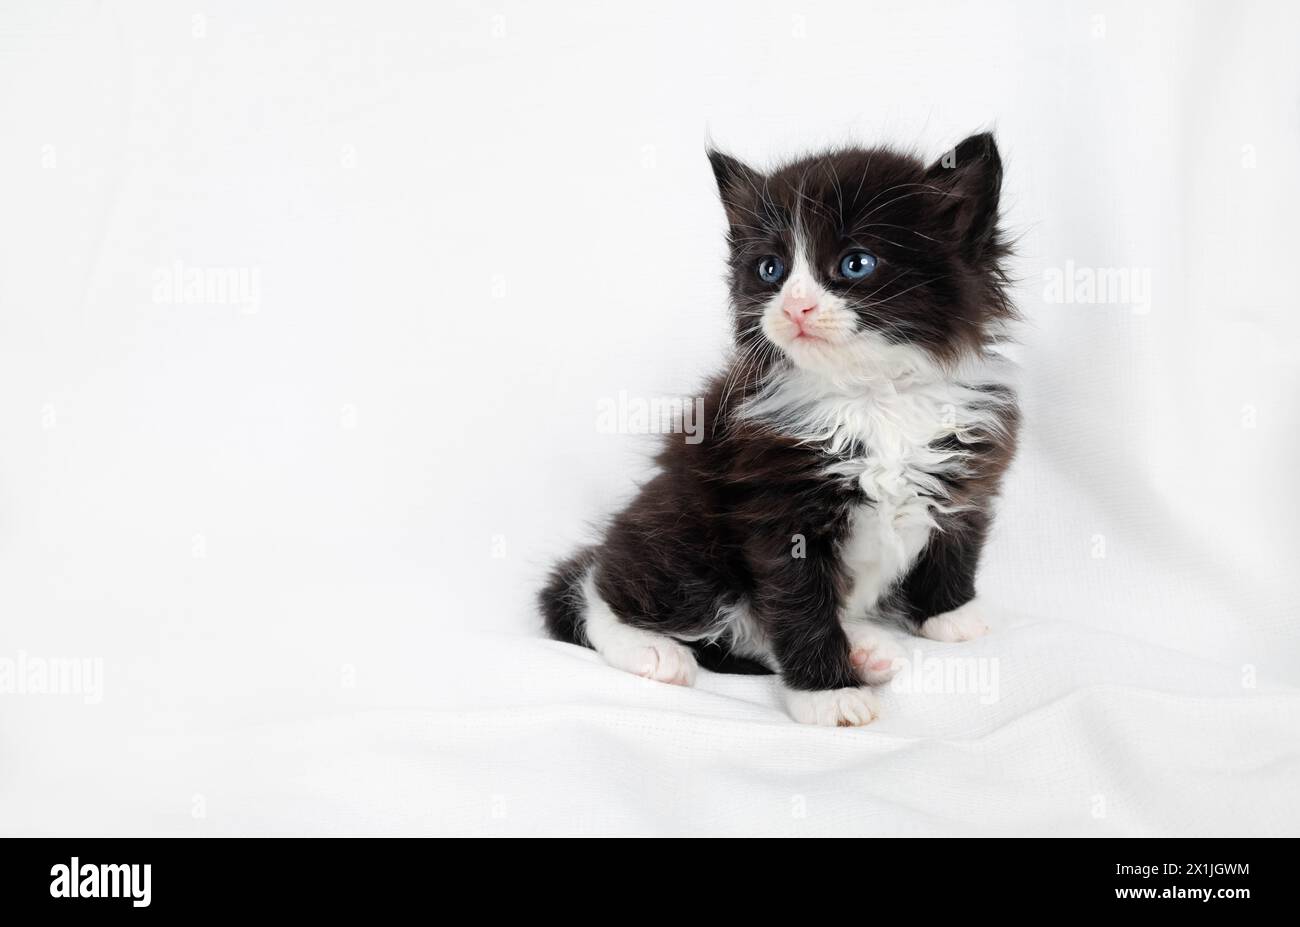 Cute black and white kitten cat sits on white towel background. Copy space. Stock Photo